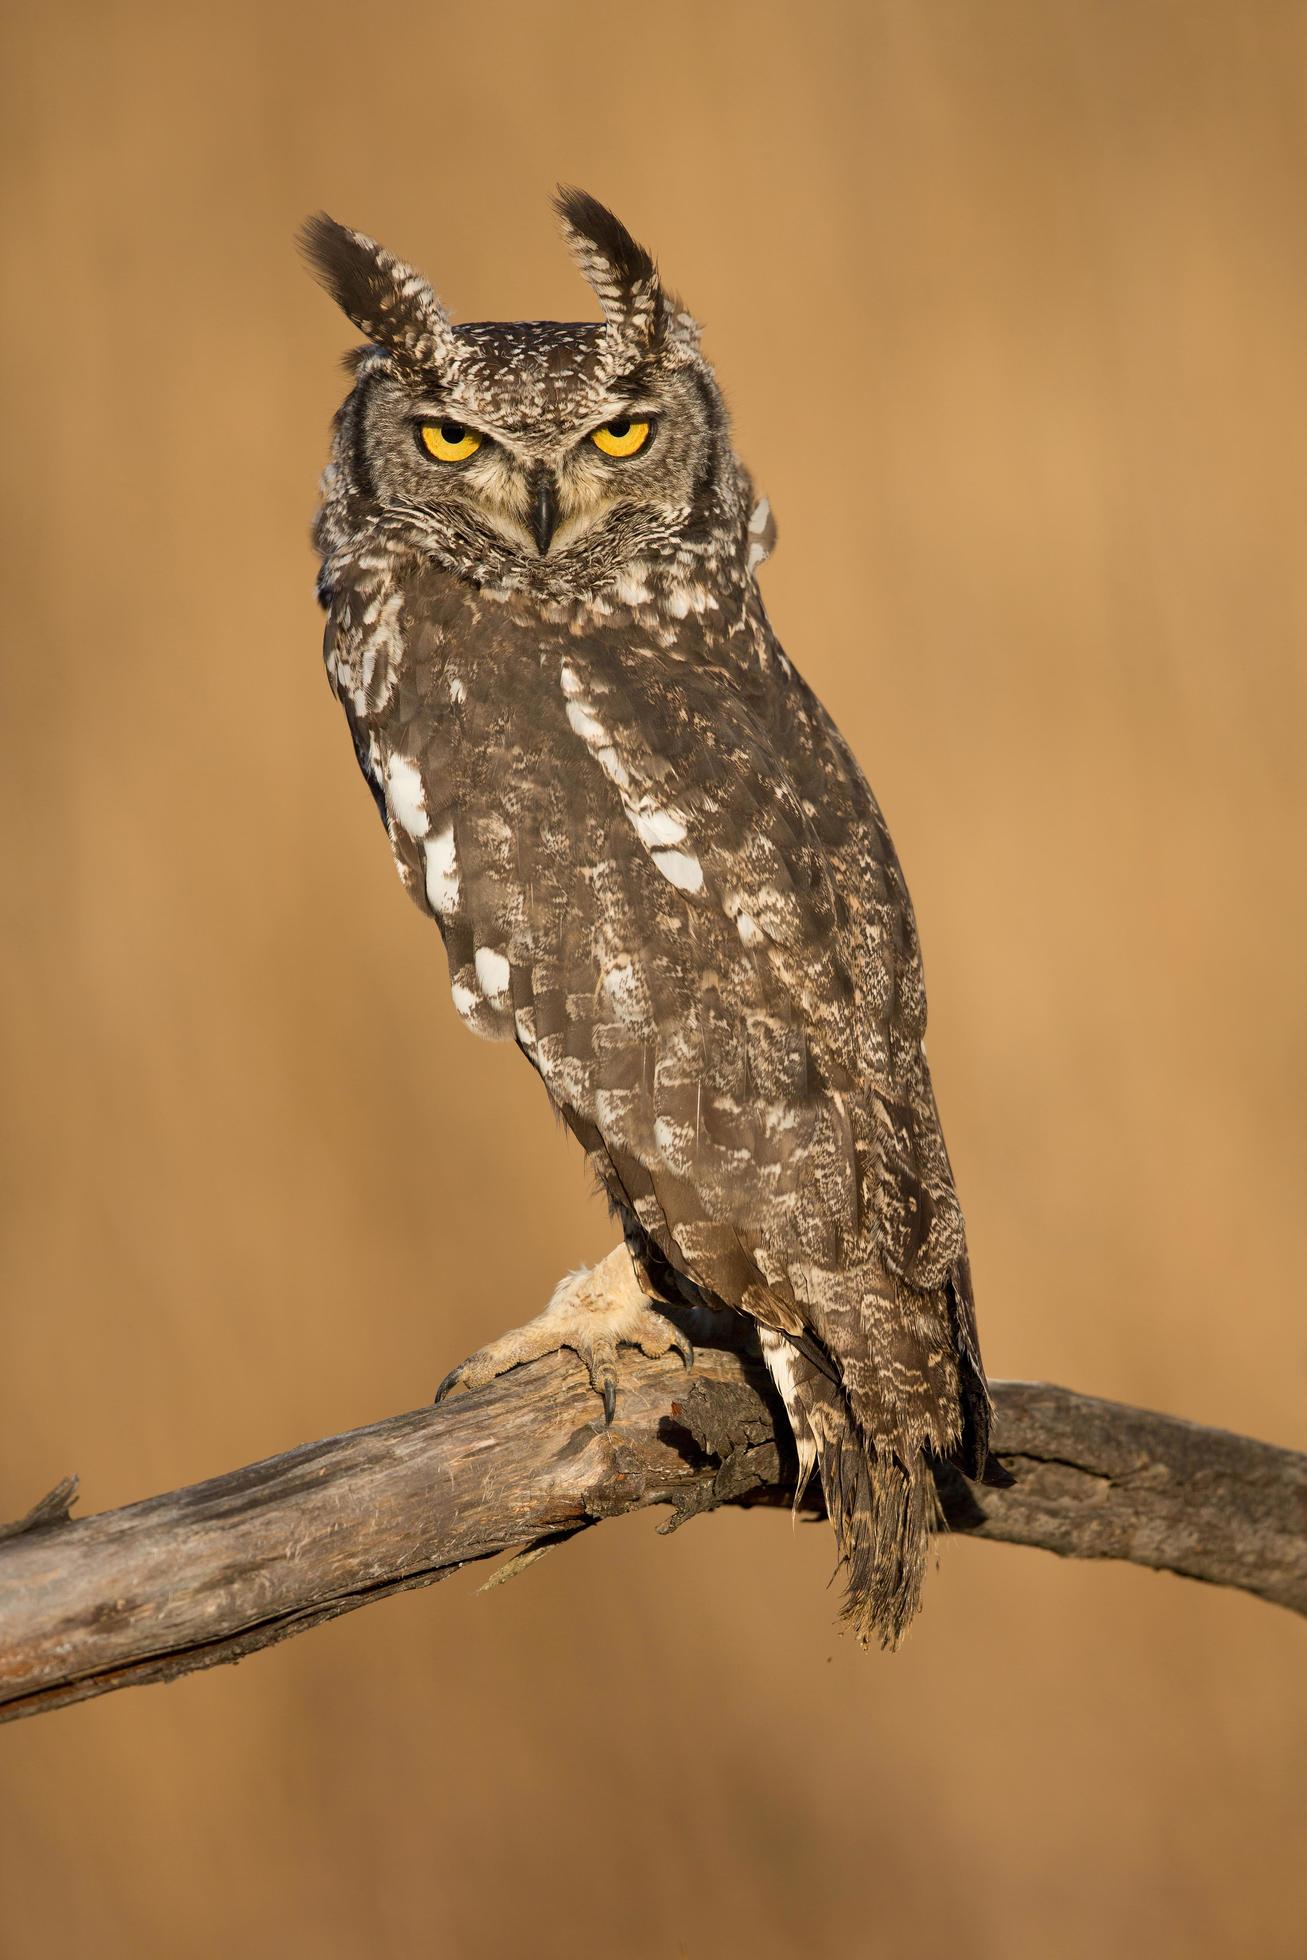 Spotted eagle owl, Bubo africanus also known as the African spotted eagle owl and the African eagle owl photo